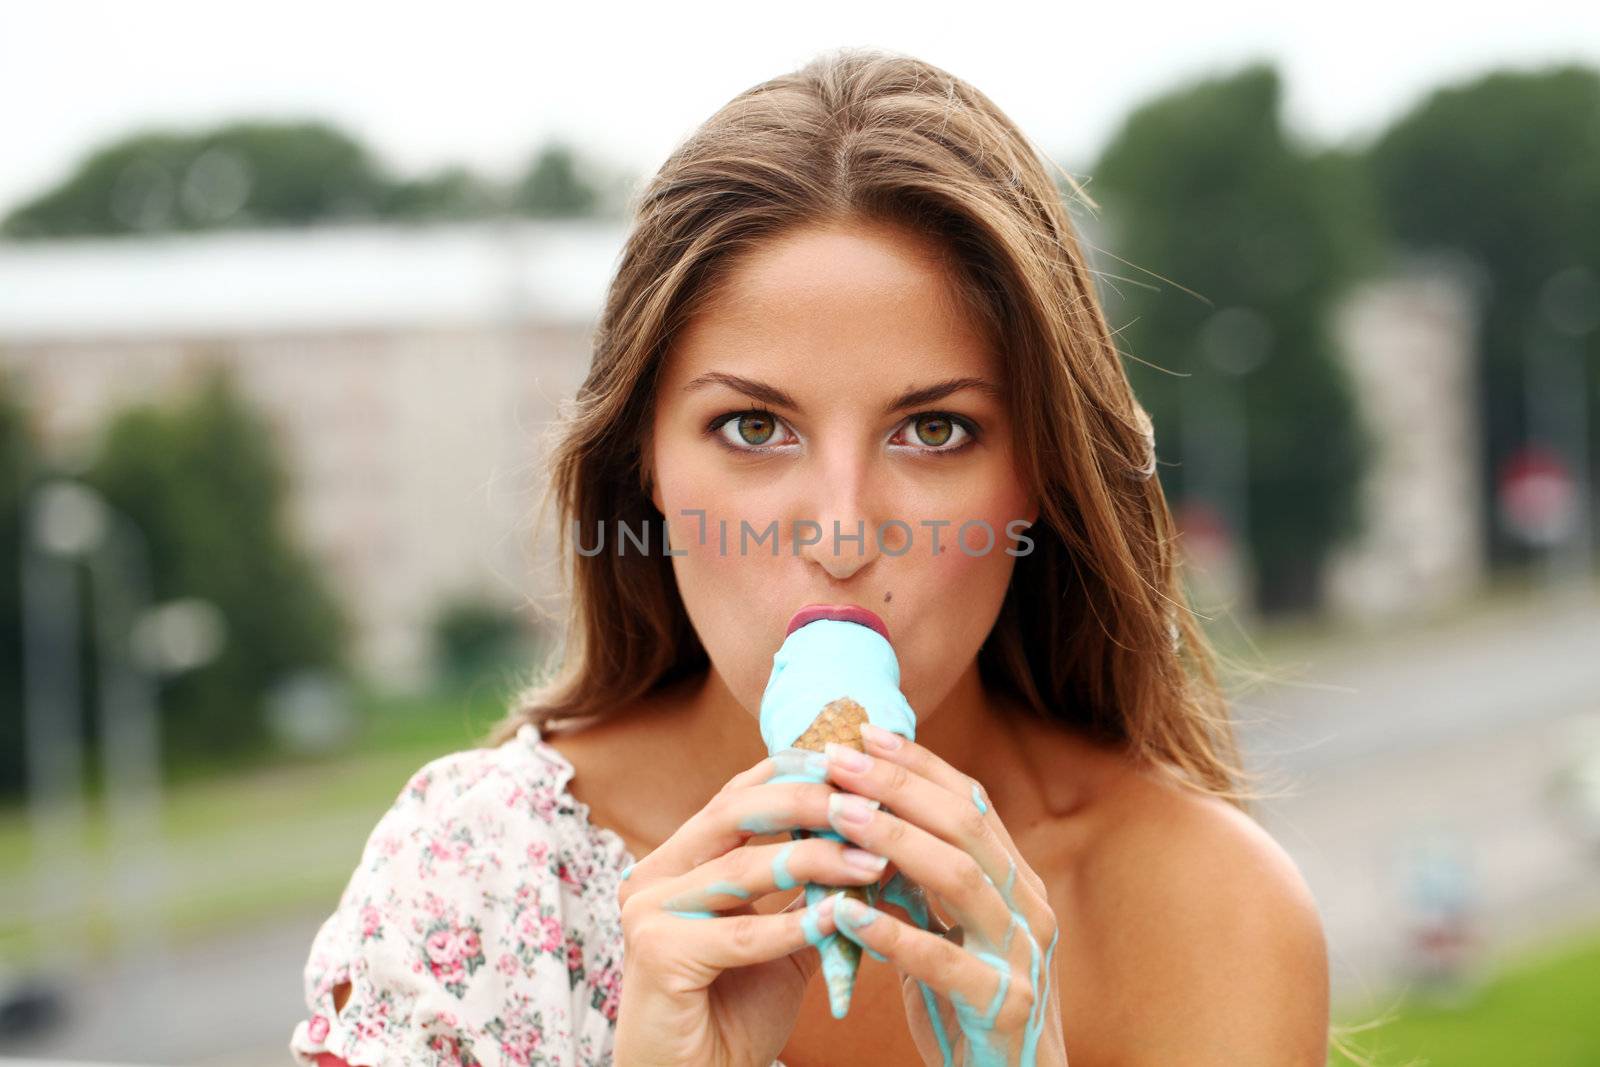 Young and attractive girl eating icecream on a street